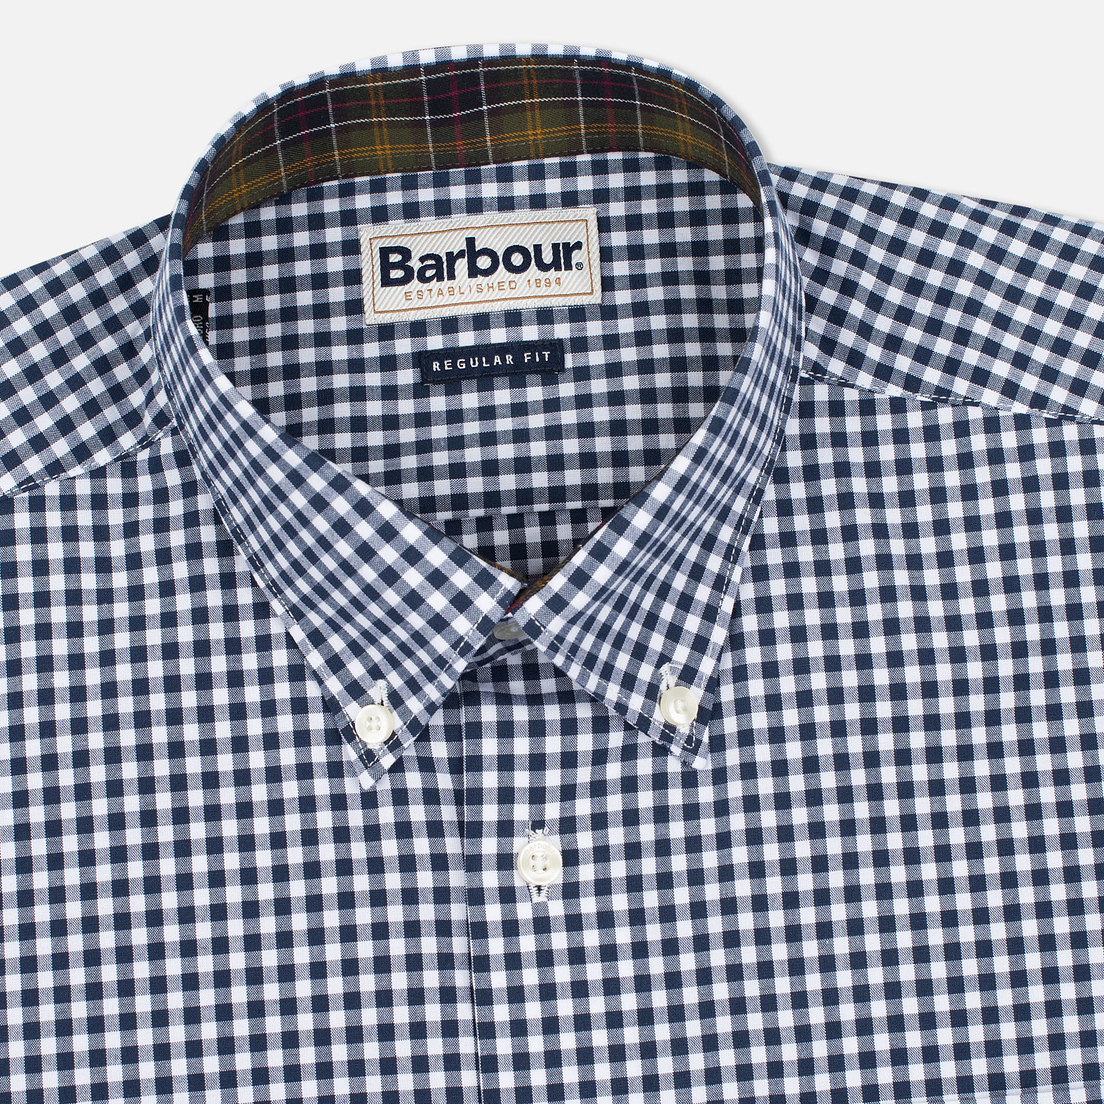 Barbour Мужская рубашка Country Gingham